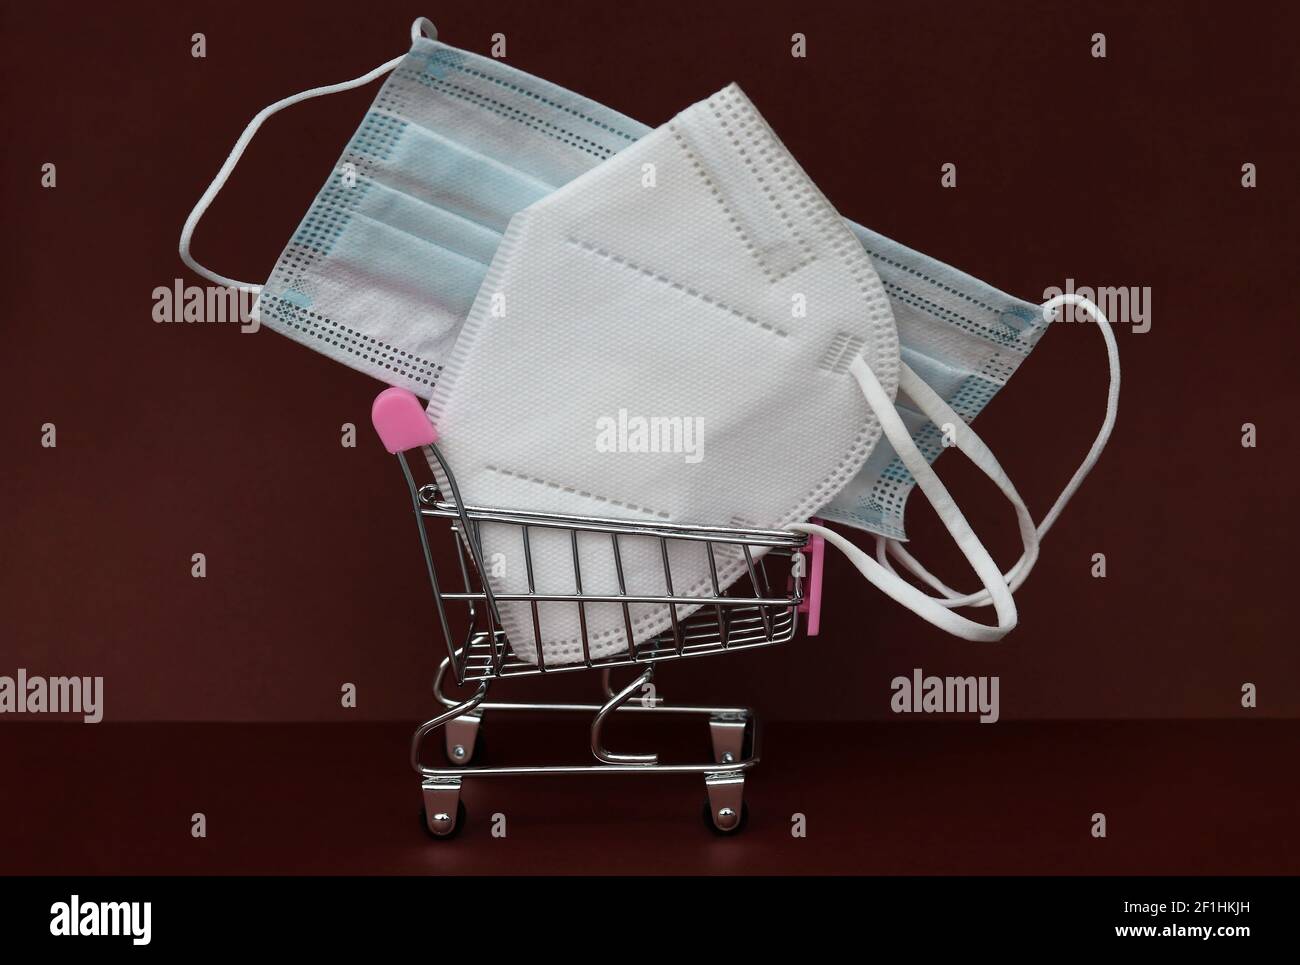 A FFP2 mask and a surgical mouth guard in a shopping cart against a brown background Stock Photo